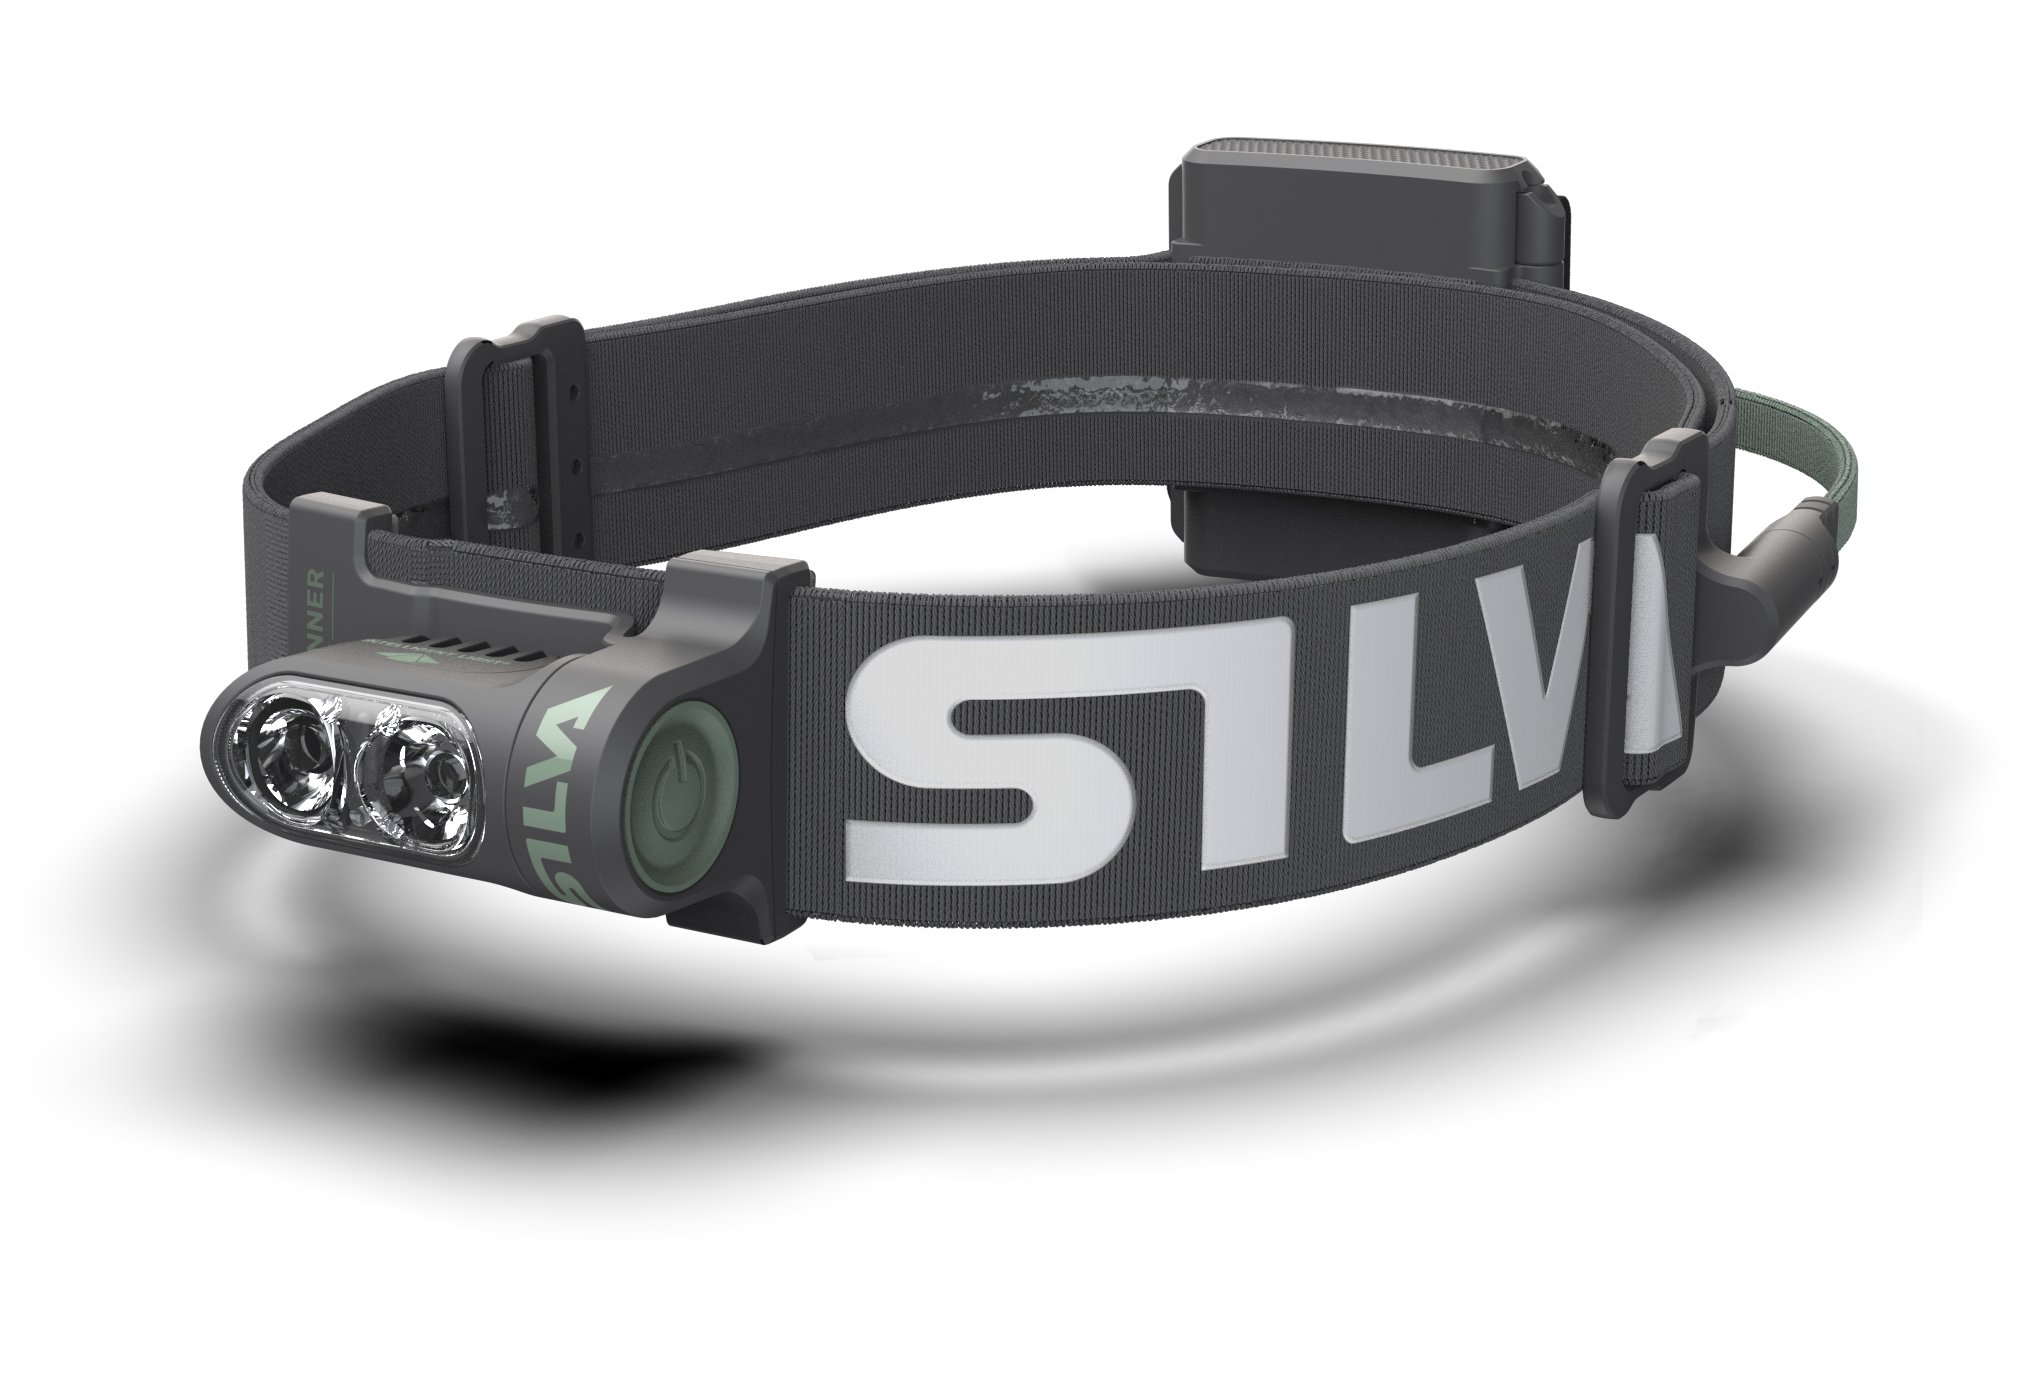 Silva Trail Runner Free 2 Lampe frontale / éclairage